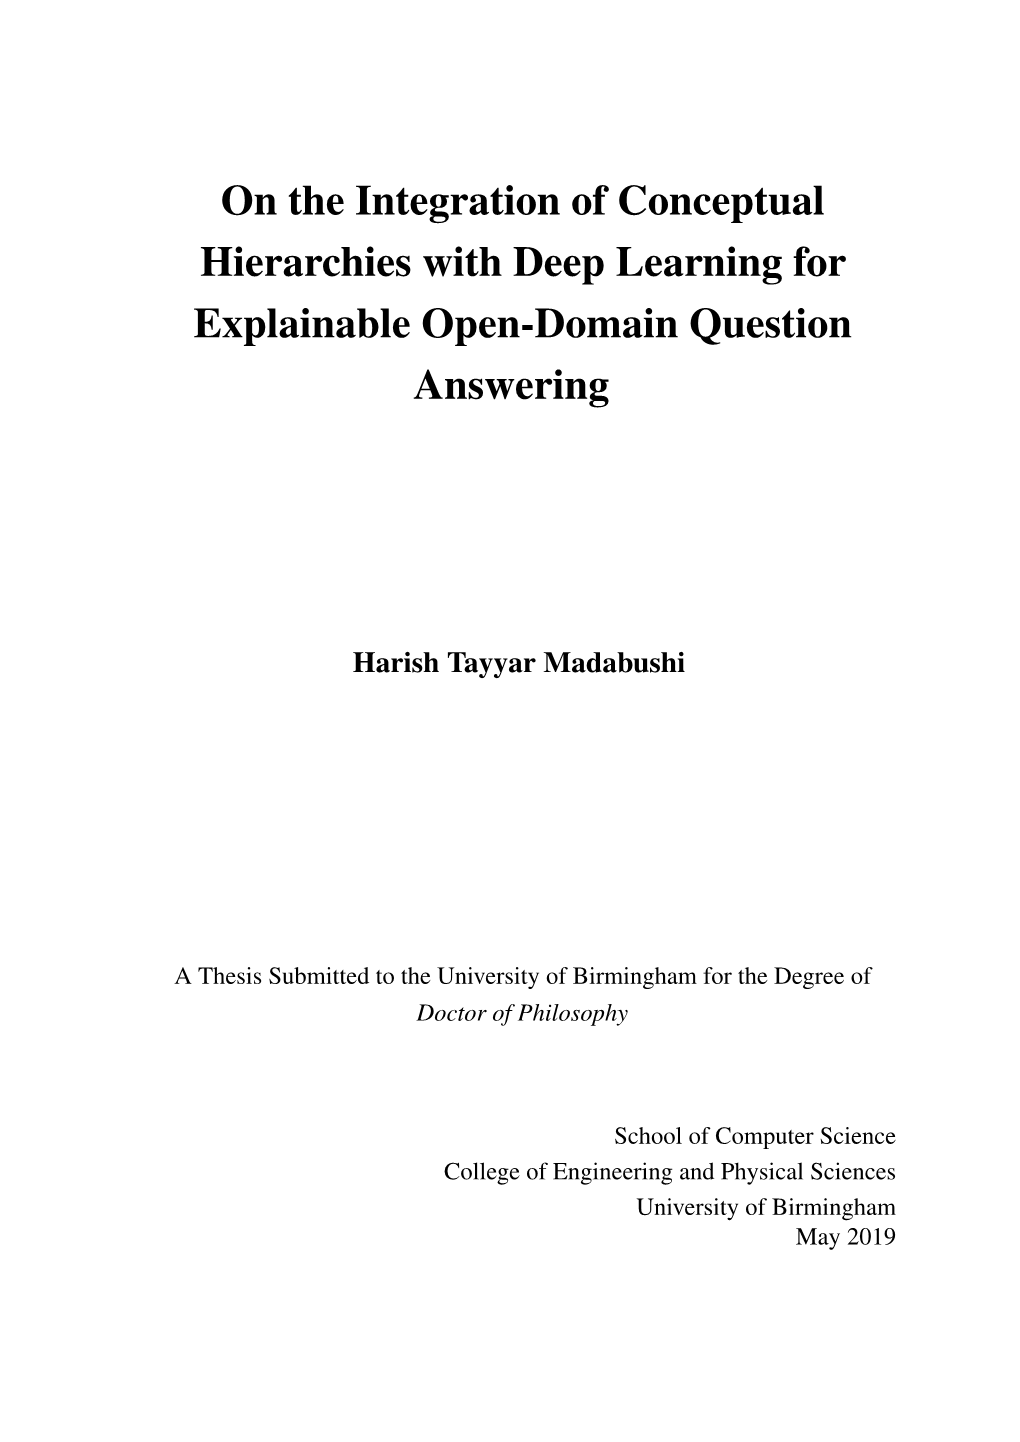 On the Integration of Conceptual Hierarchies with Deep Learning for Explainable Open-Domain Question Answering